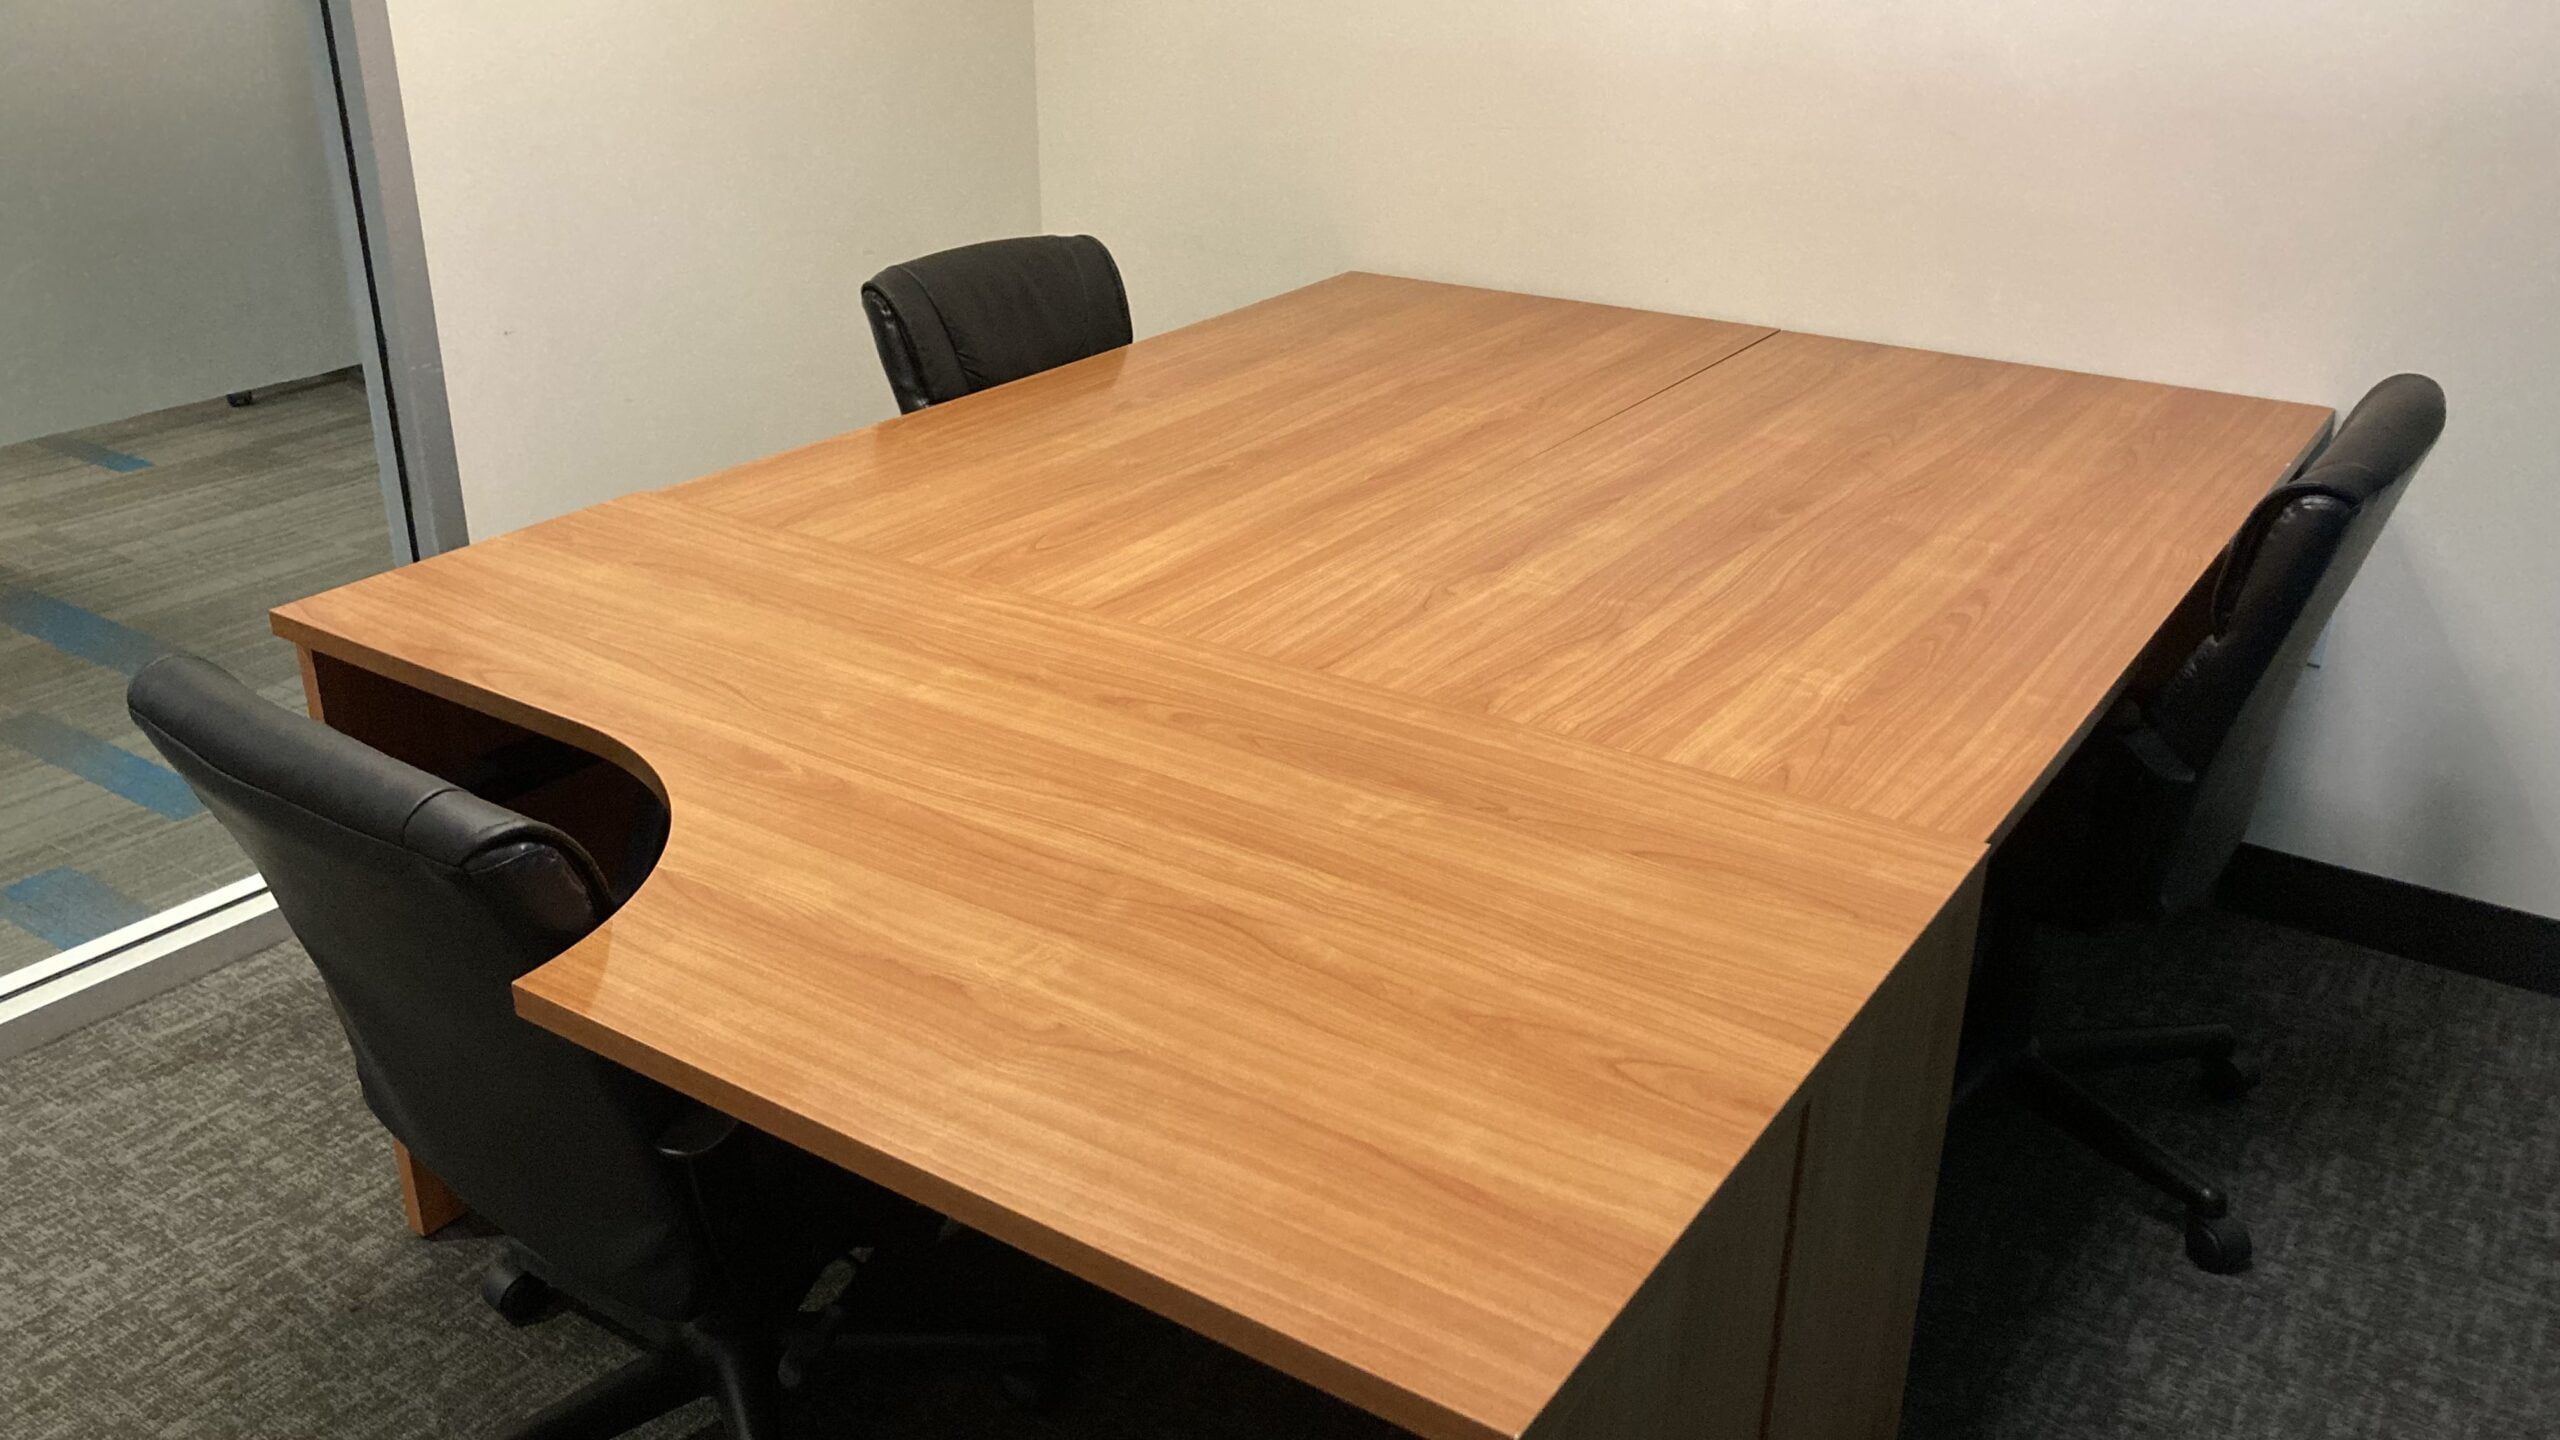 Makiki small meeting room office for rent at SURF Incubator in Downtown Seattle Washington